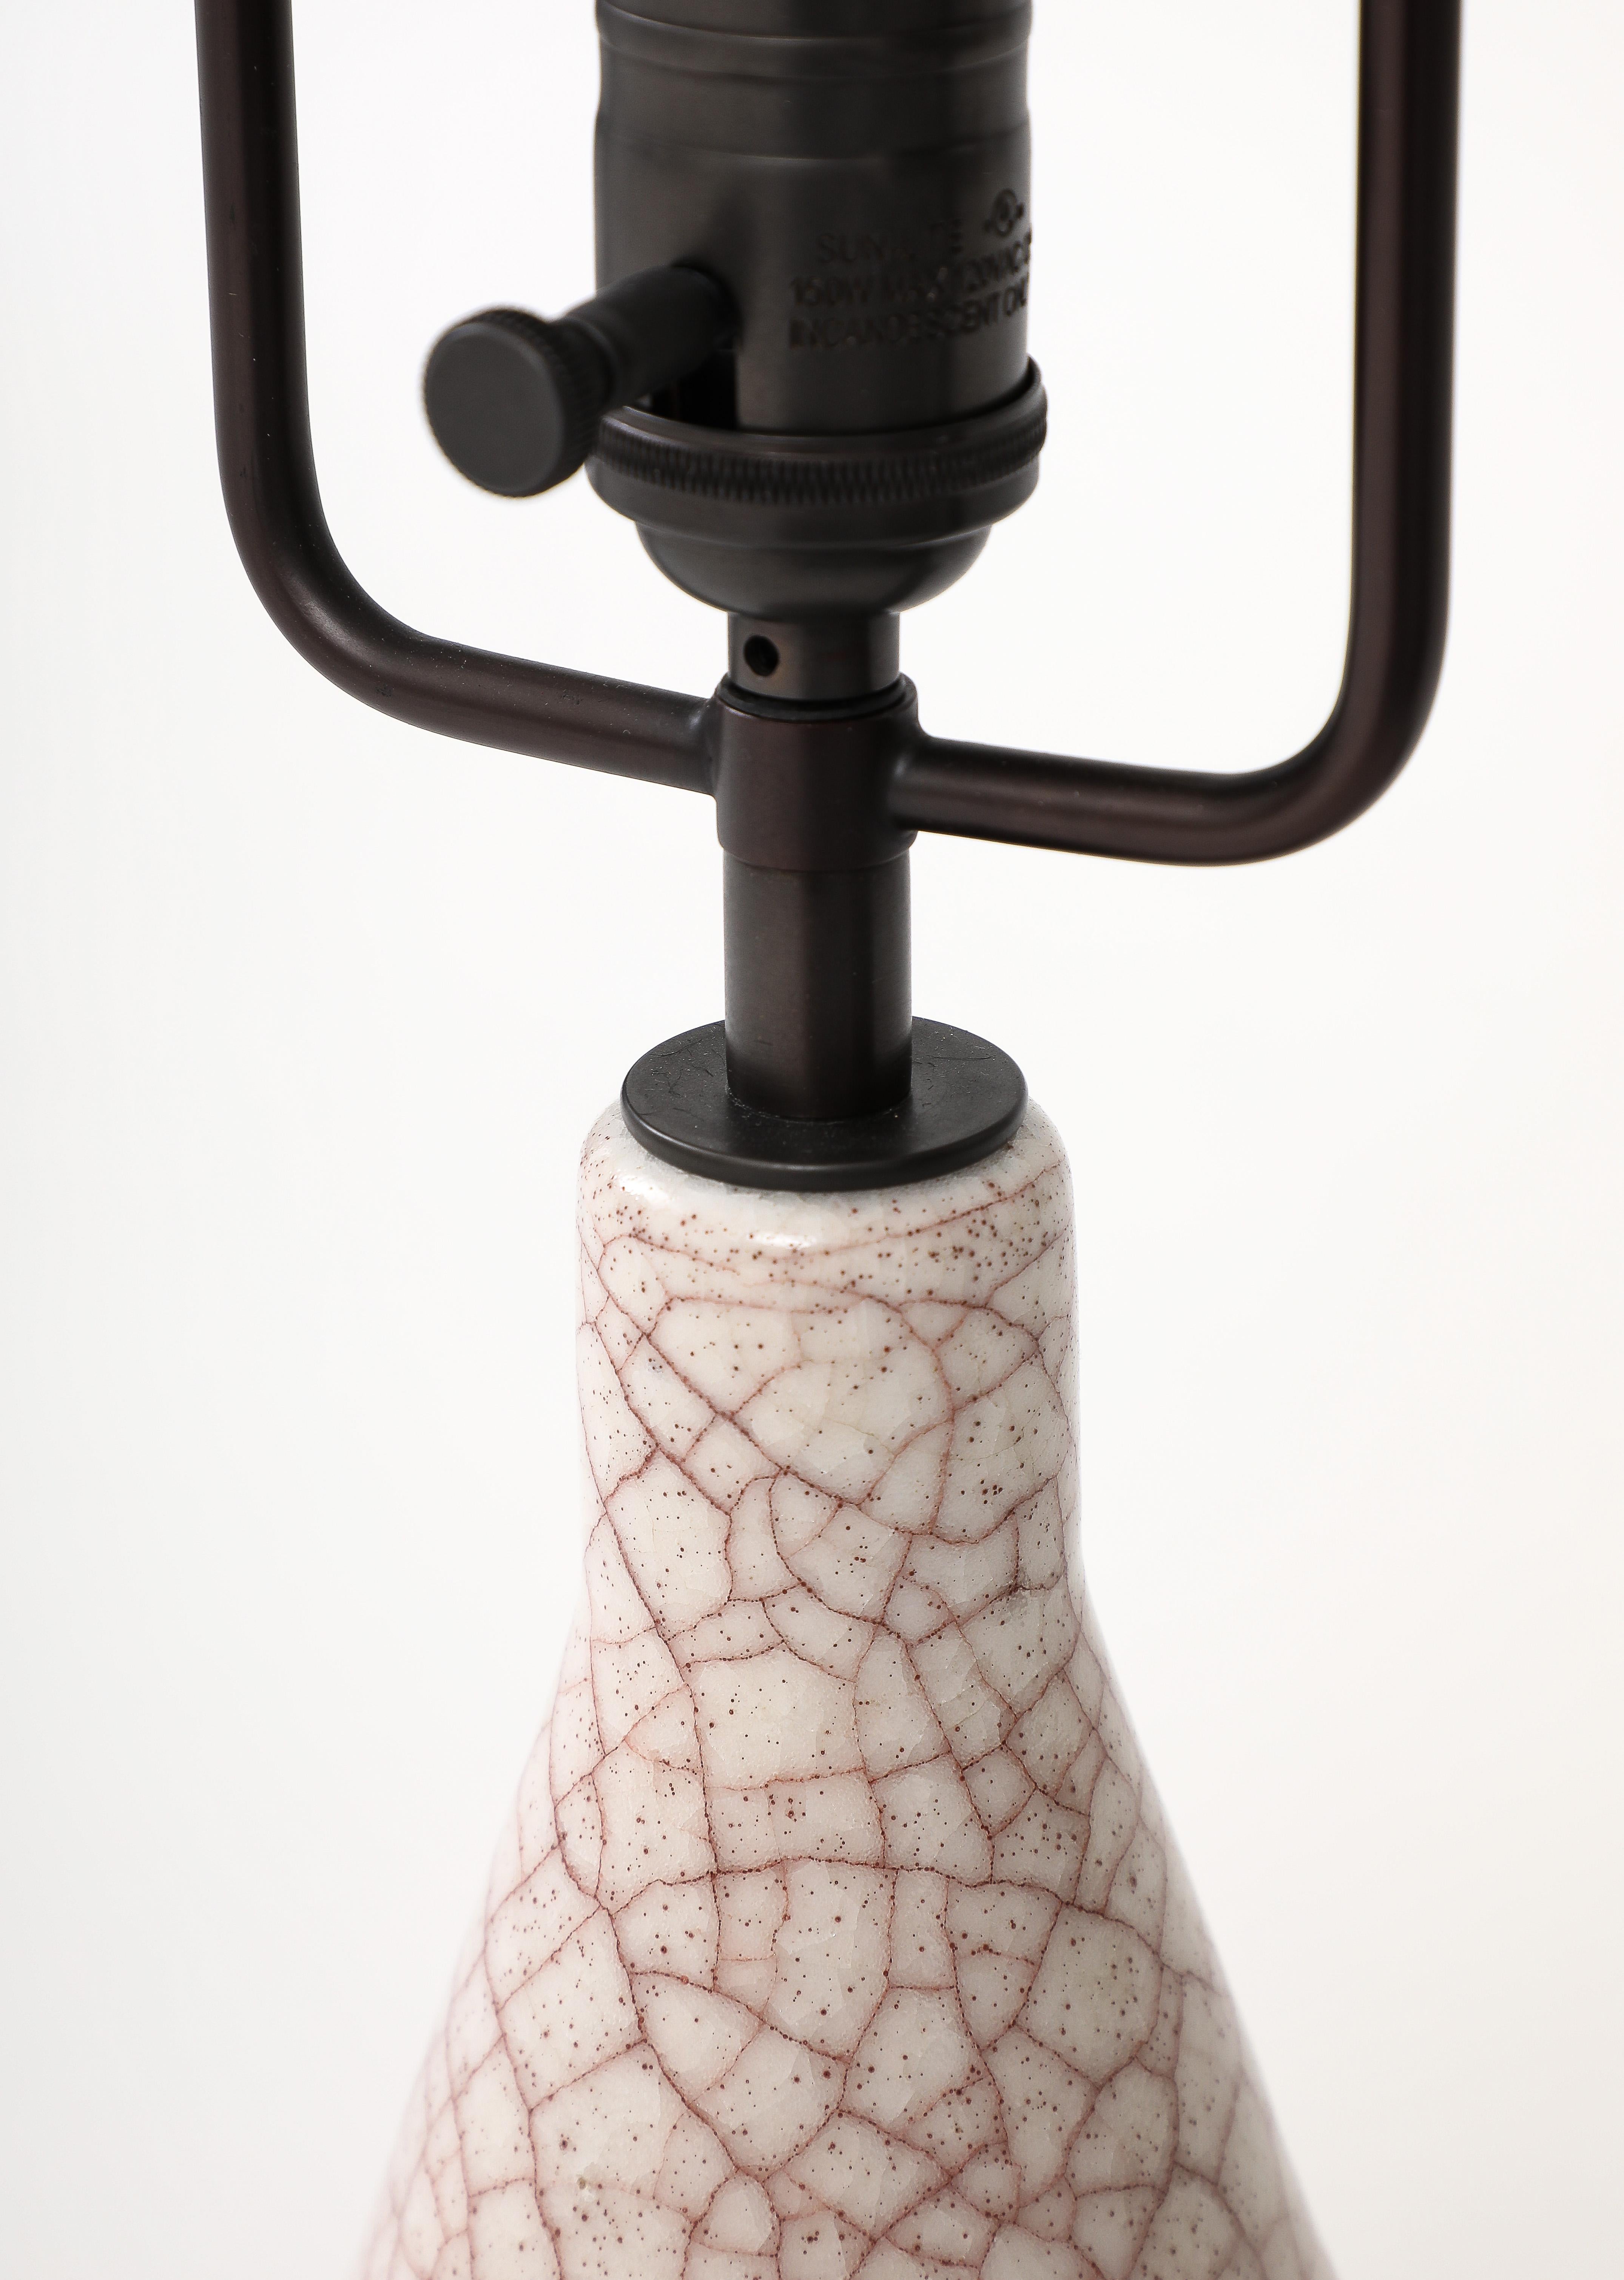 Glazed Ceramic Table Lamp Attributed to Alice Colonieu, France, c. 1960 For Sale 4